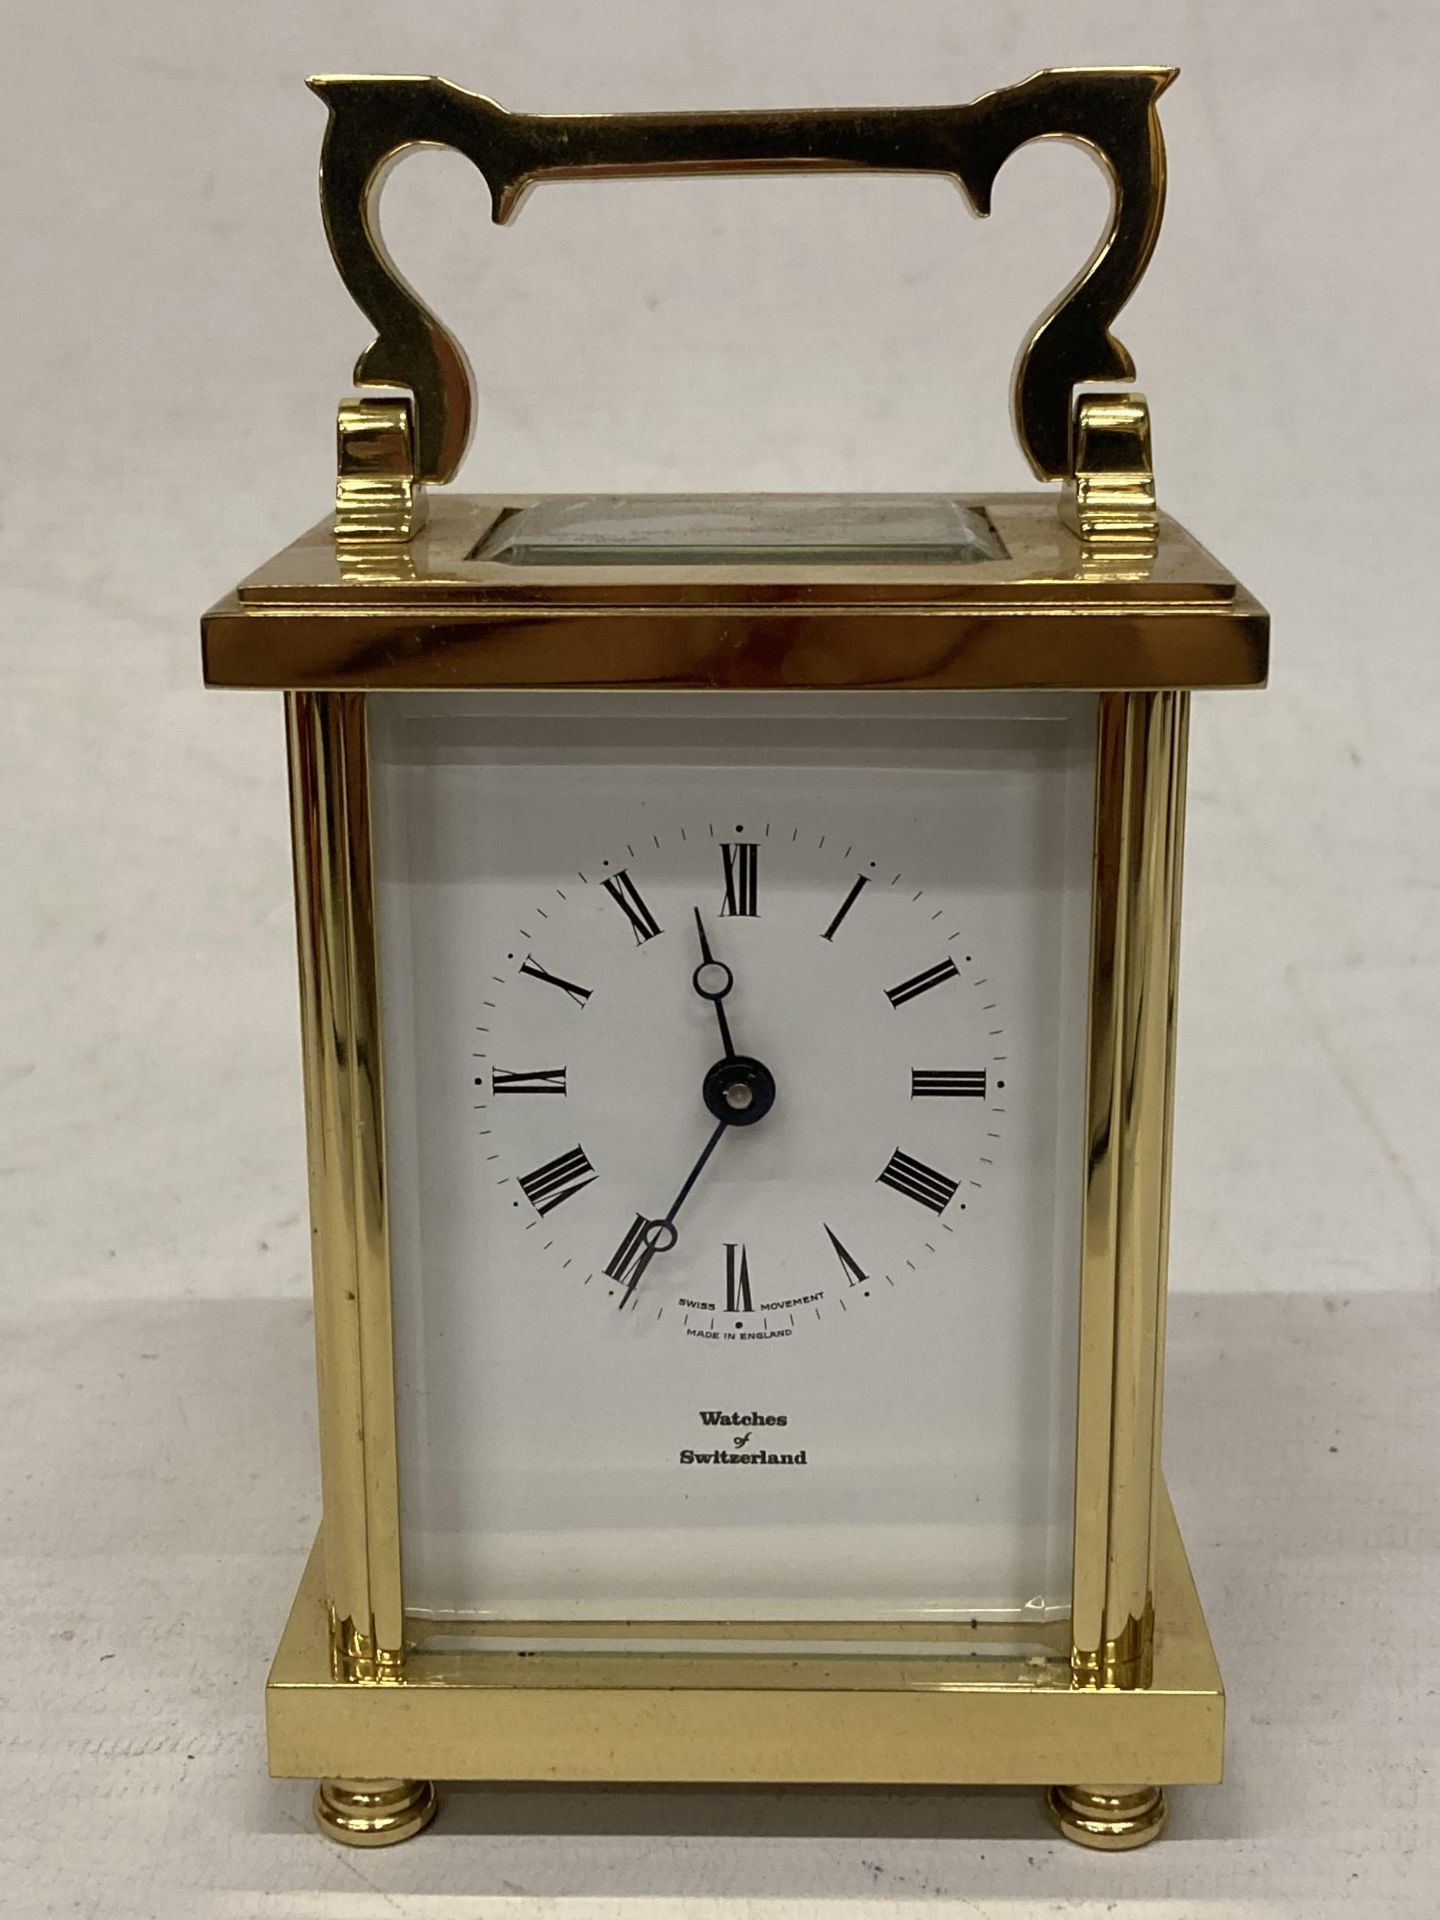 A WATCHES OF SWITZERLAND BRASS CARRIAGE CLOCK